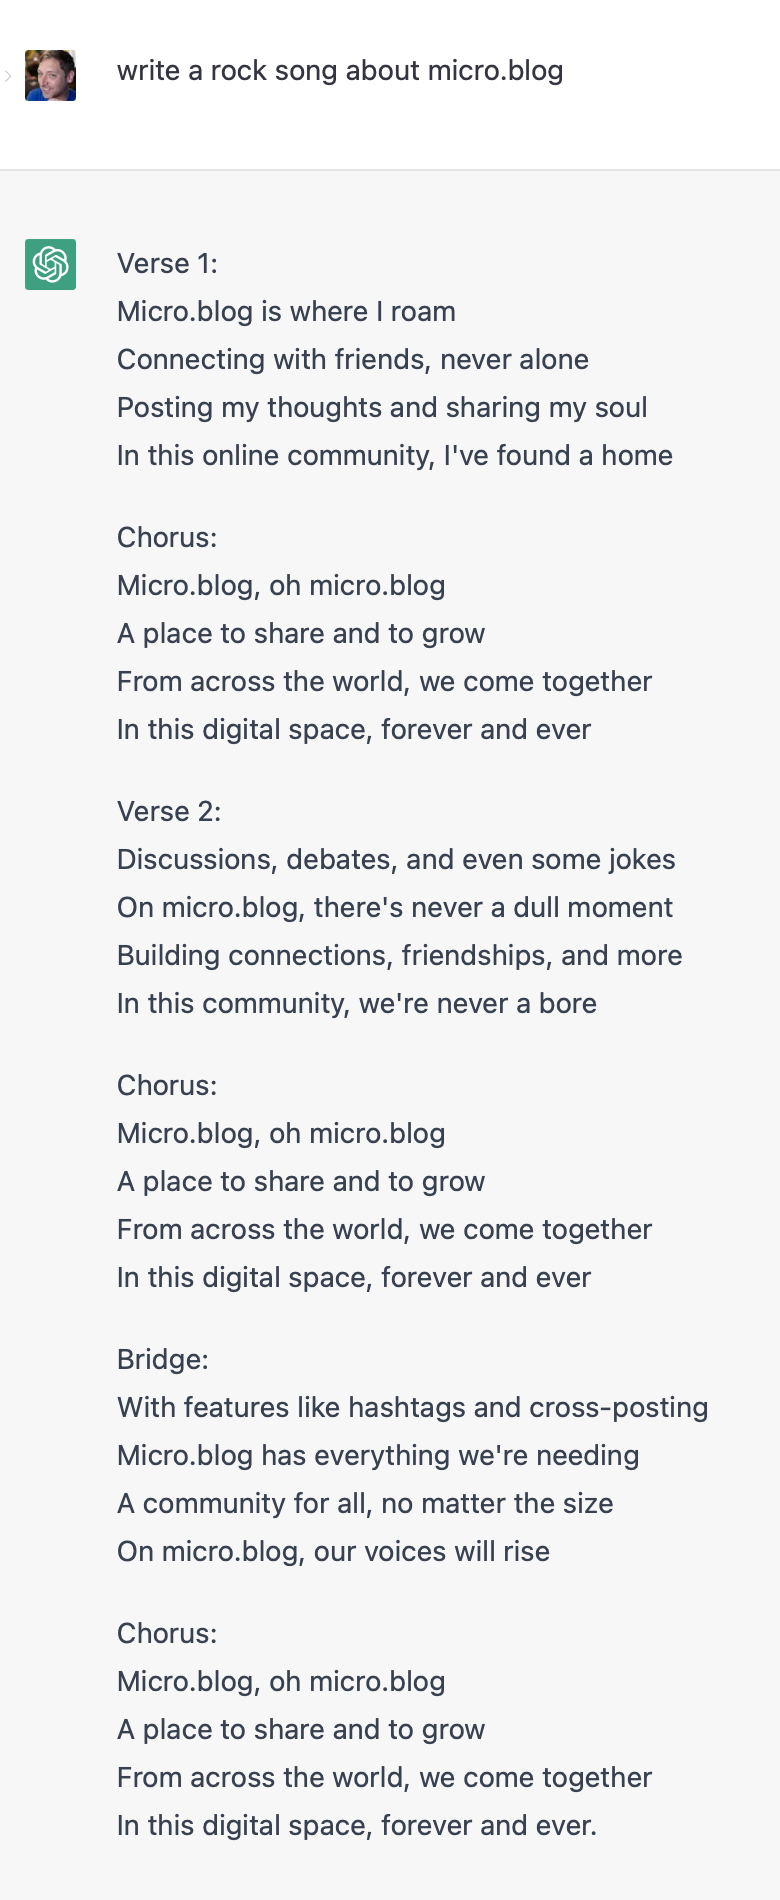 Screenshot of OpenAI response to request to write a rock song about Micro.blog: Verse 1:&10;Micro.blog is where I roam&10;Connecting with friends, never alone&10;Posting my thoughts and sharing my soul&10;In this online community, I've found a home&10;&10;Chorus:&10;Micro.blog, oh micro.blog&10;A place to share and to grow&10;From across the world, we come together&10;In this digital space, forever and ever&10;&10;Verse 2:&10;Discussions, debates, and even some jokes&10;On micro.blog, there's never a dull moment&10;Building connections, friendships, and more&10;In this community, we're never a bore&10;&10;Chorus:&10;Micro.blog, oh micro.blog&10;A place to share and to grow&10;From across the world, we come together&10;In this digital space, forever and ever&10;&10;Bridge:&10;With features like hashtags and cross-posting&10;Micro.blog has everything we're needing&10;A community for all, no matter the size&10;On micro.blog, our voices will rise&10;&10;Chorus:&10;Micro.blog, oh micro.blog&10;A place to share and to grow&10;From across the world, we come together&10;In this digital space, forever and ever.